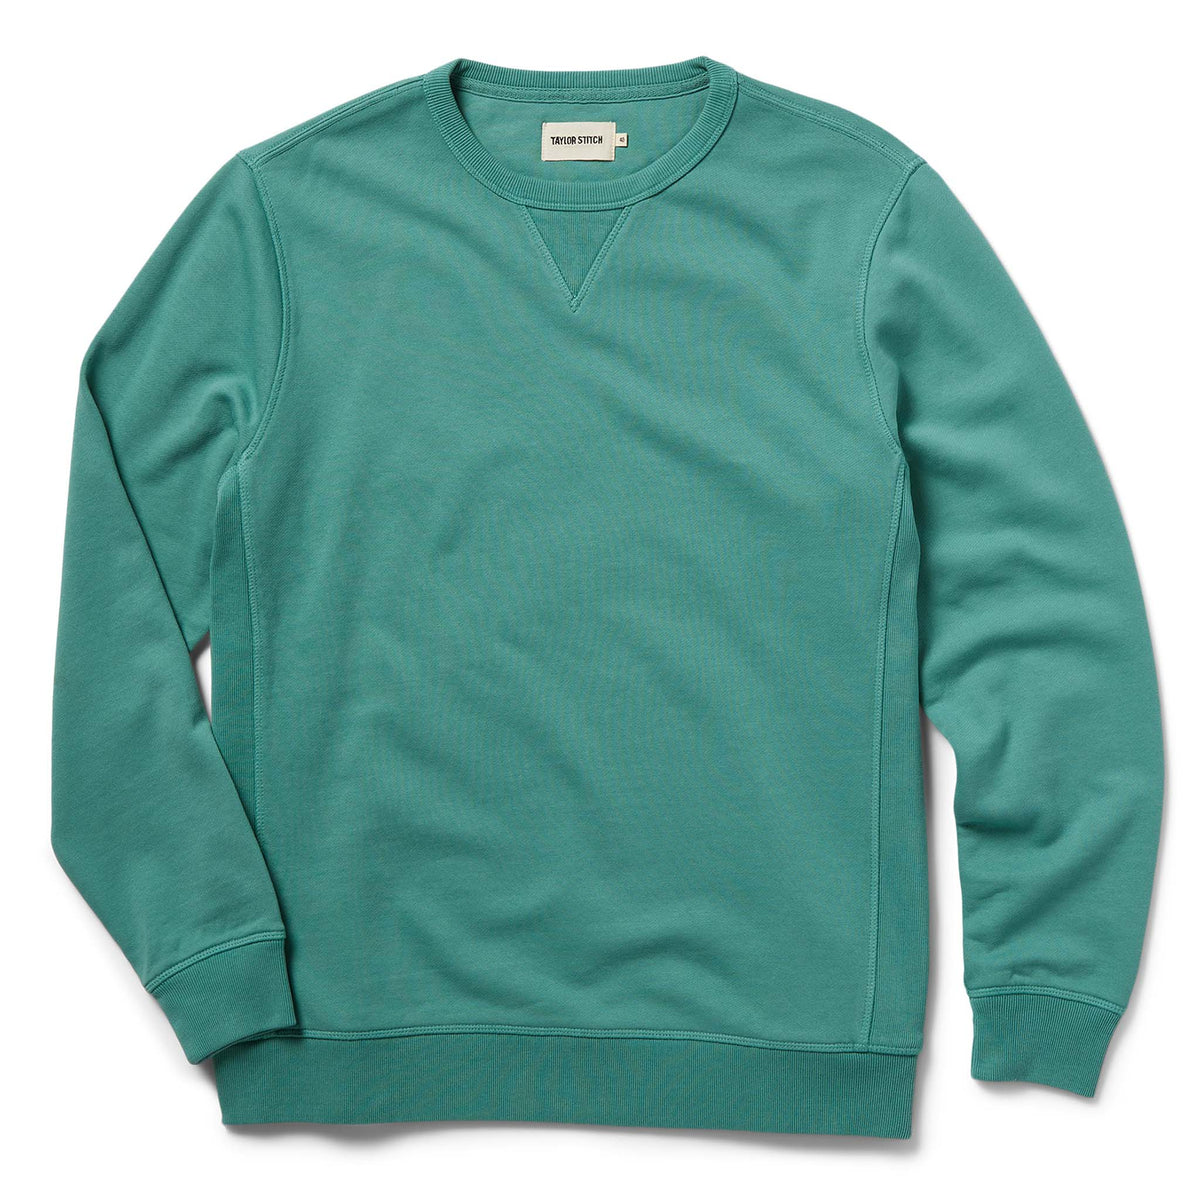 Men's Sweaters - Wool Sweaters, Cardigans & Pullovers